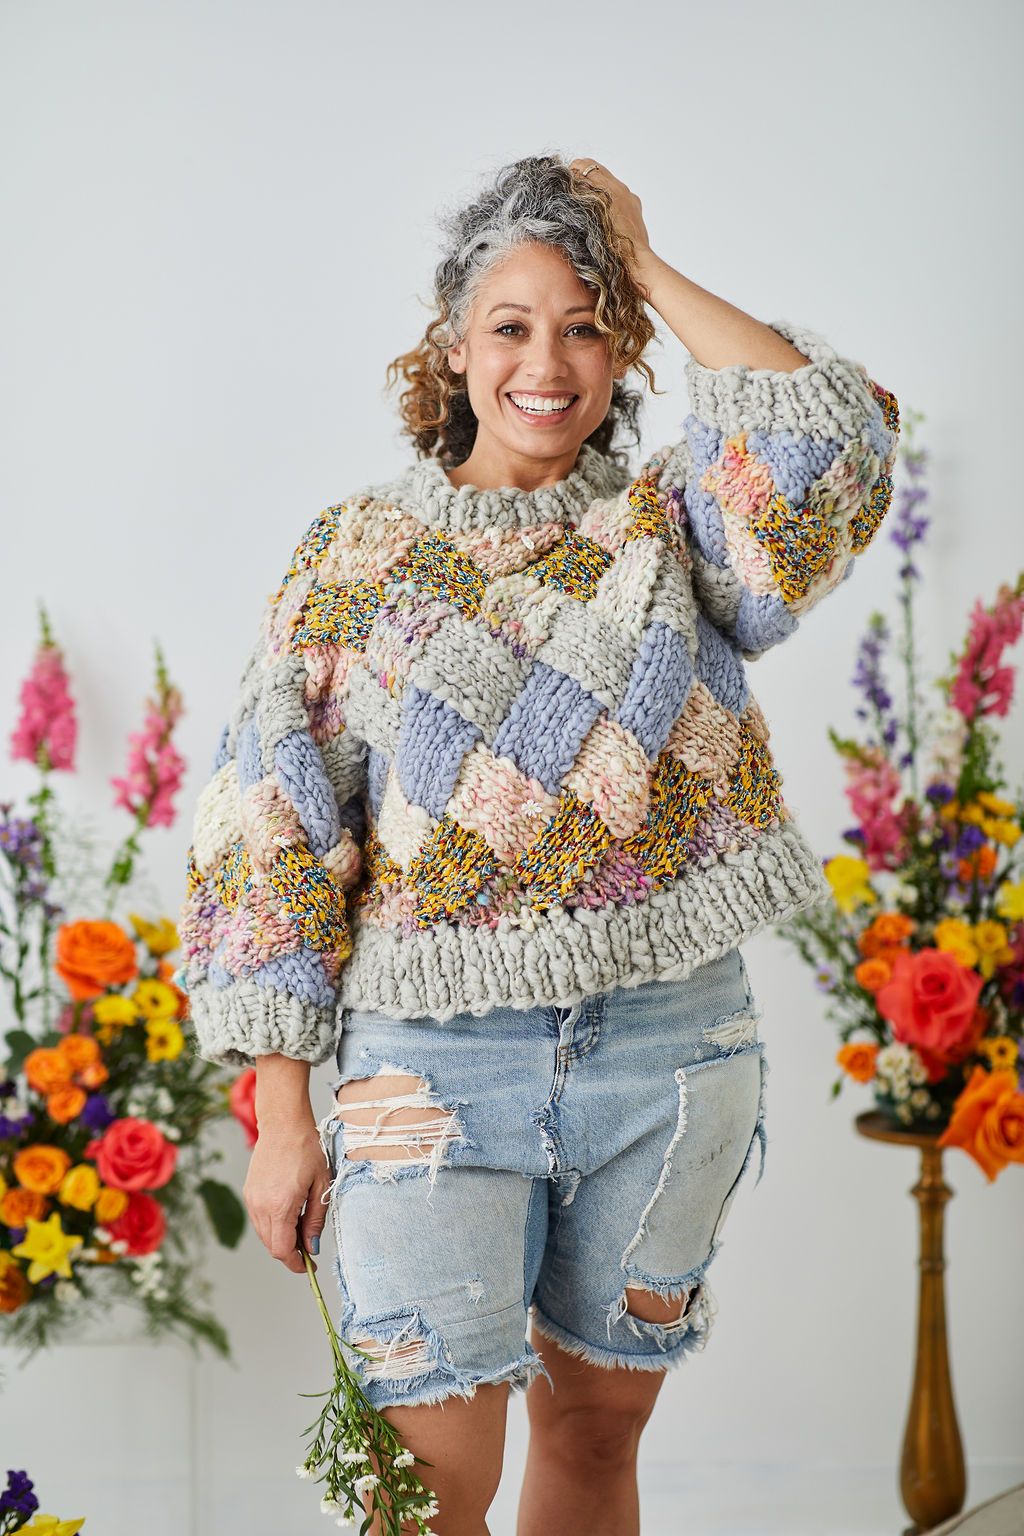 Model smiling with hand on head wearing entrelac sweater.